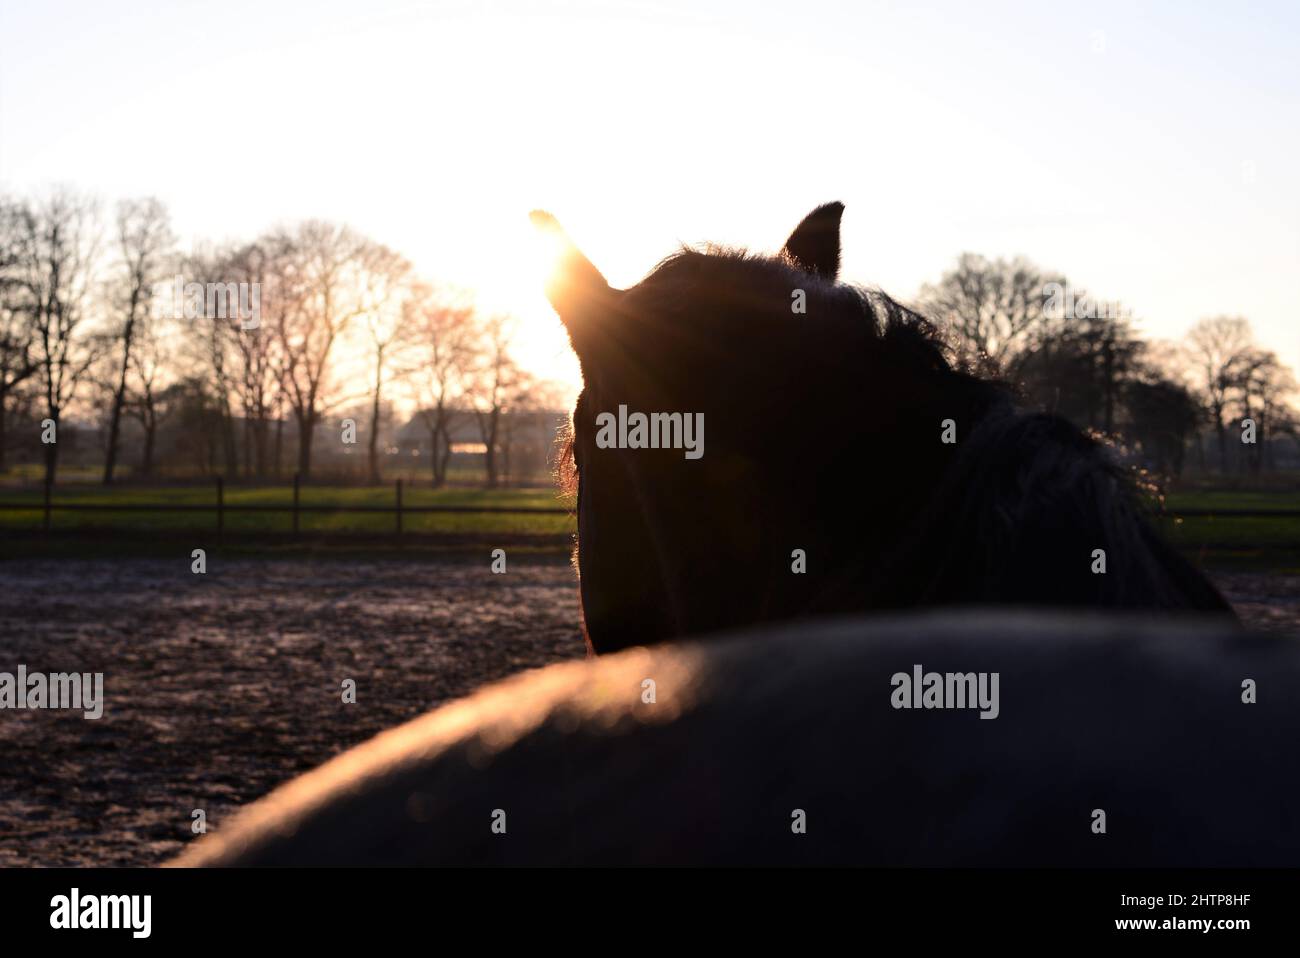 A brown horse from behind during sunset as a close up Stock Photo